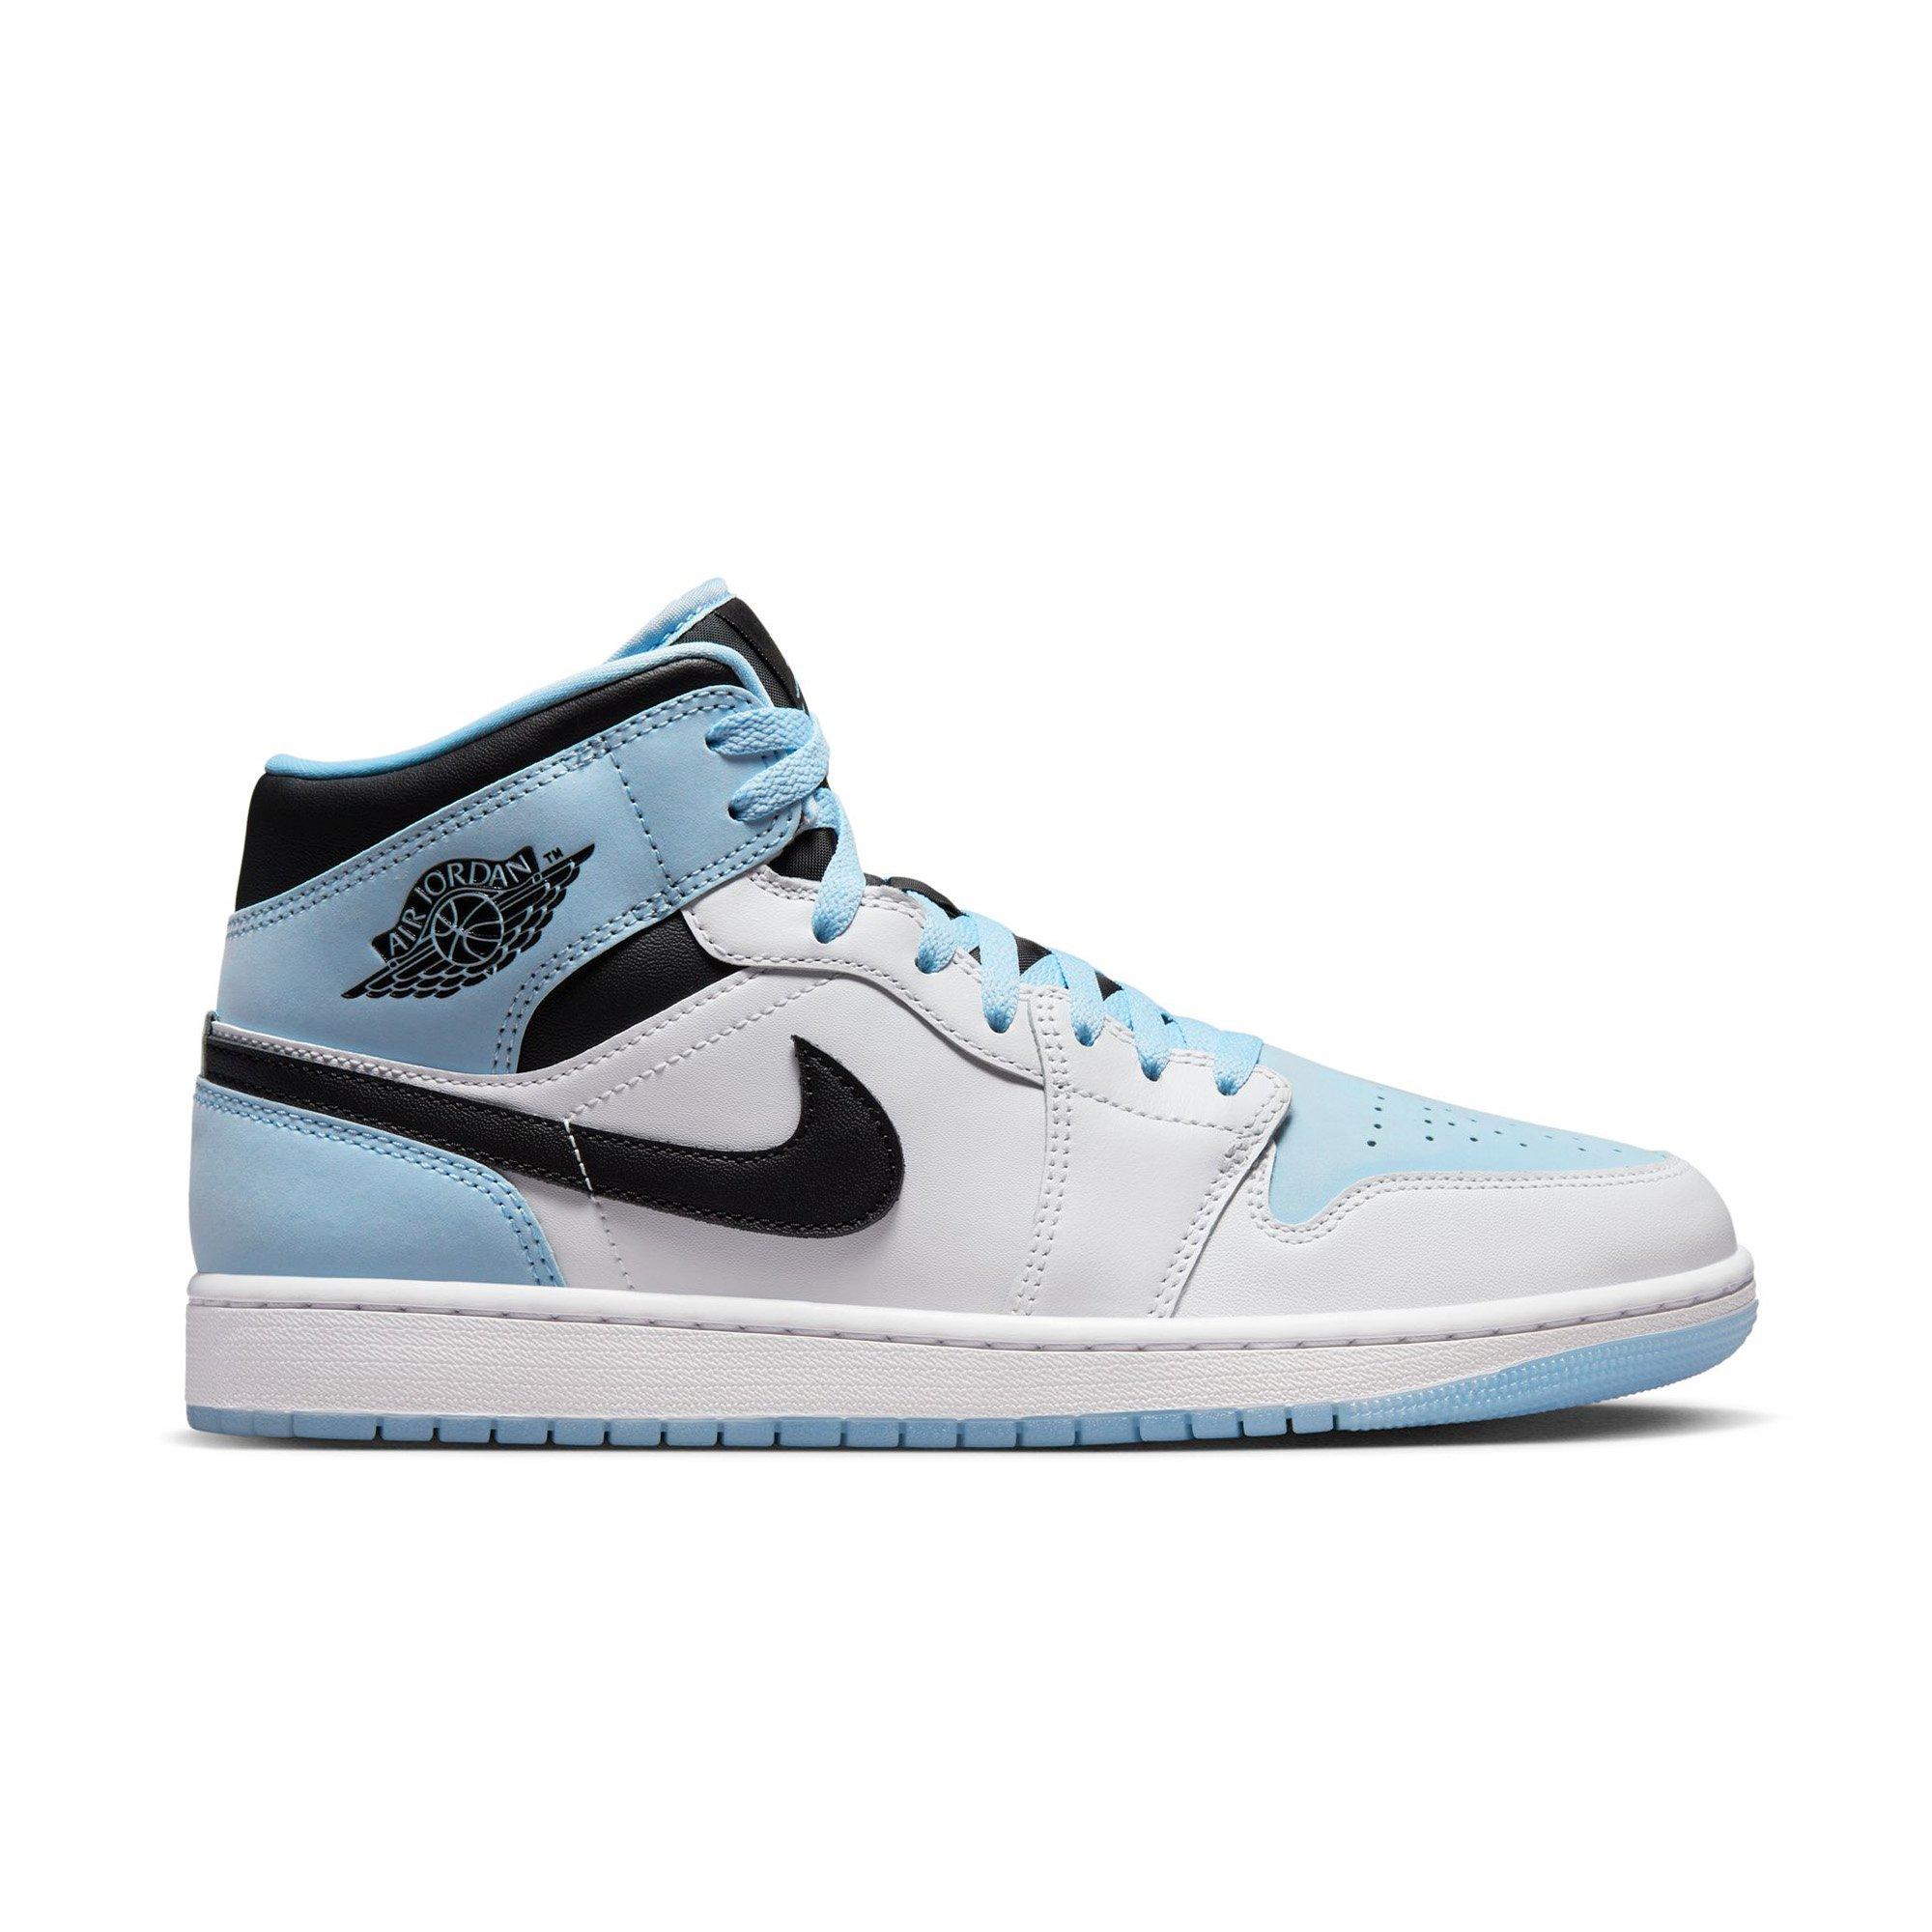 blue and silver jordan 1s